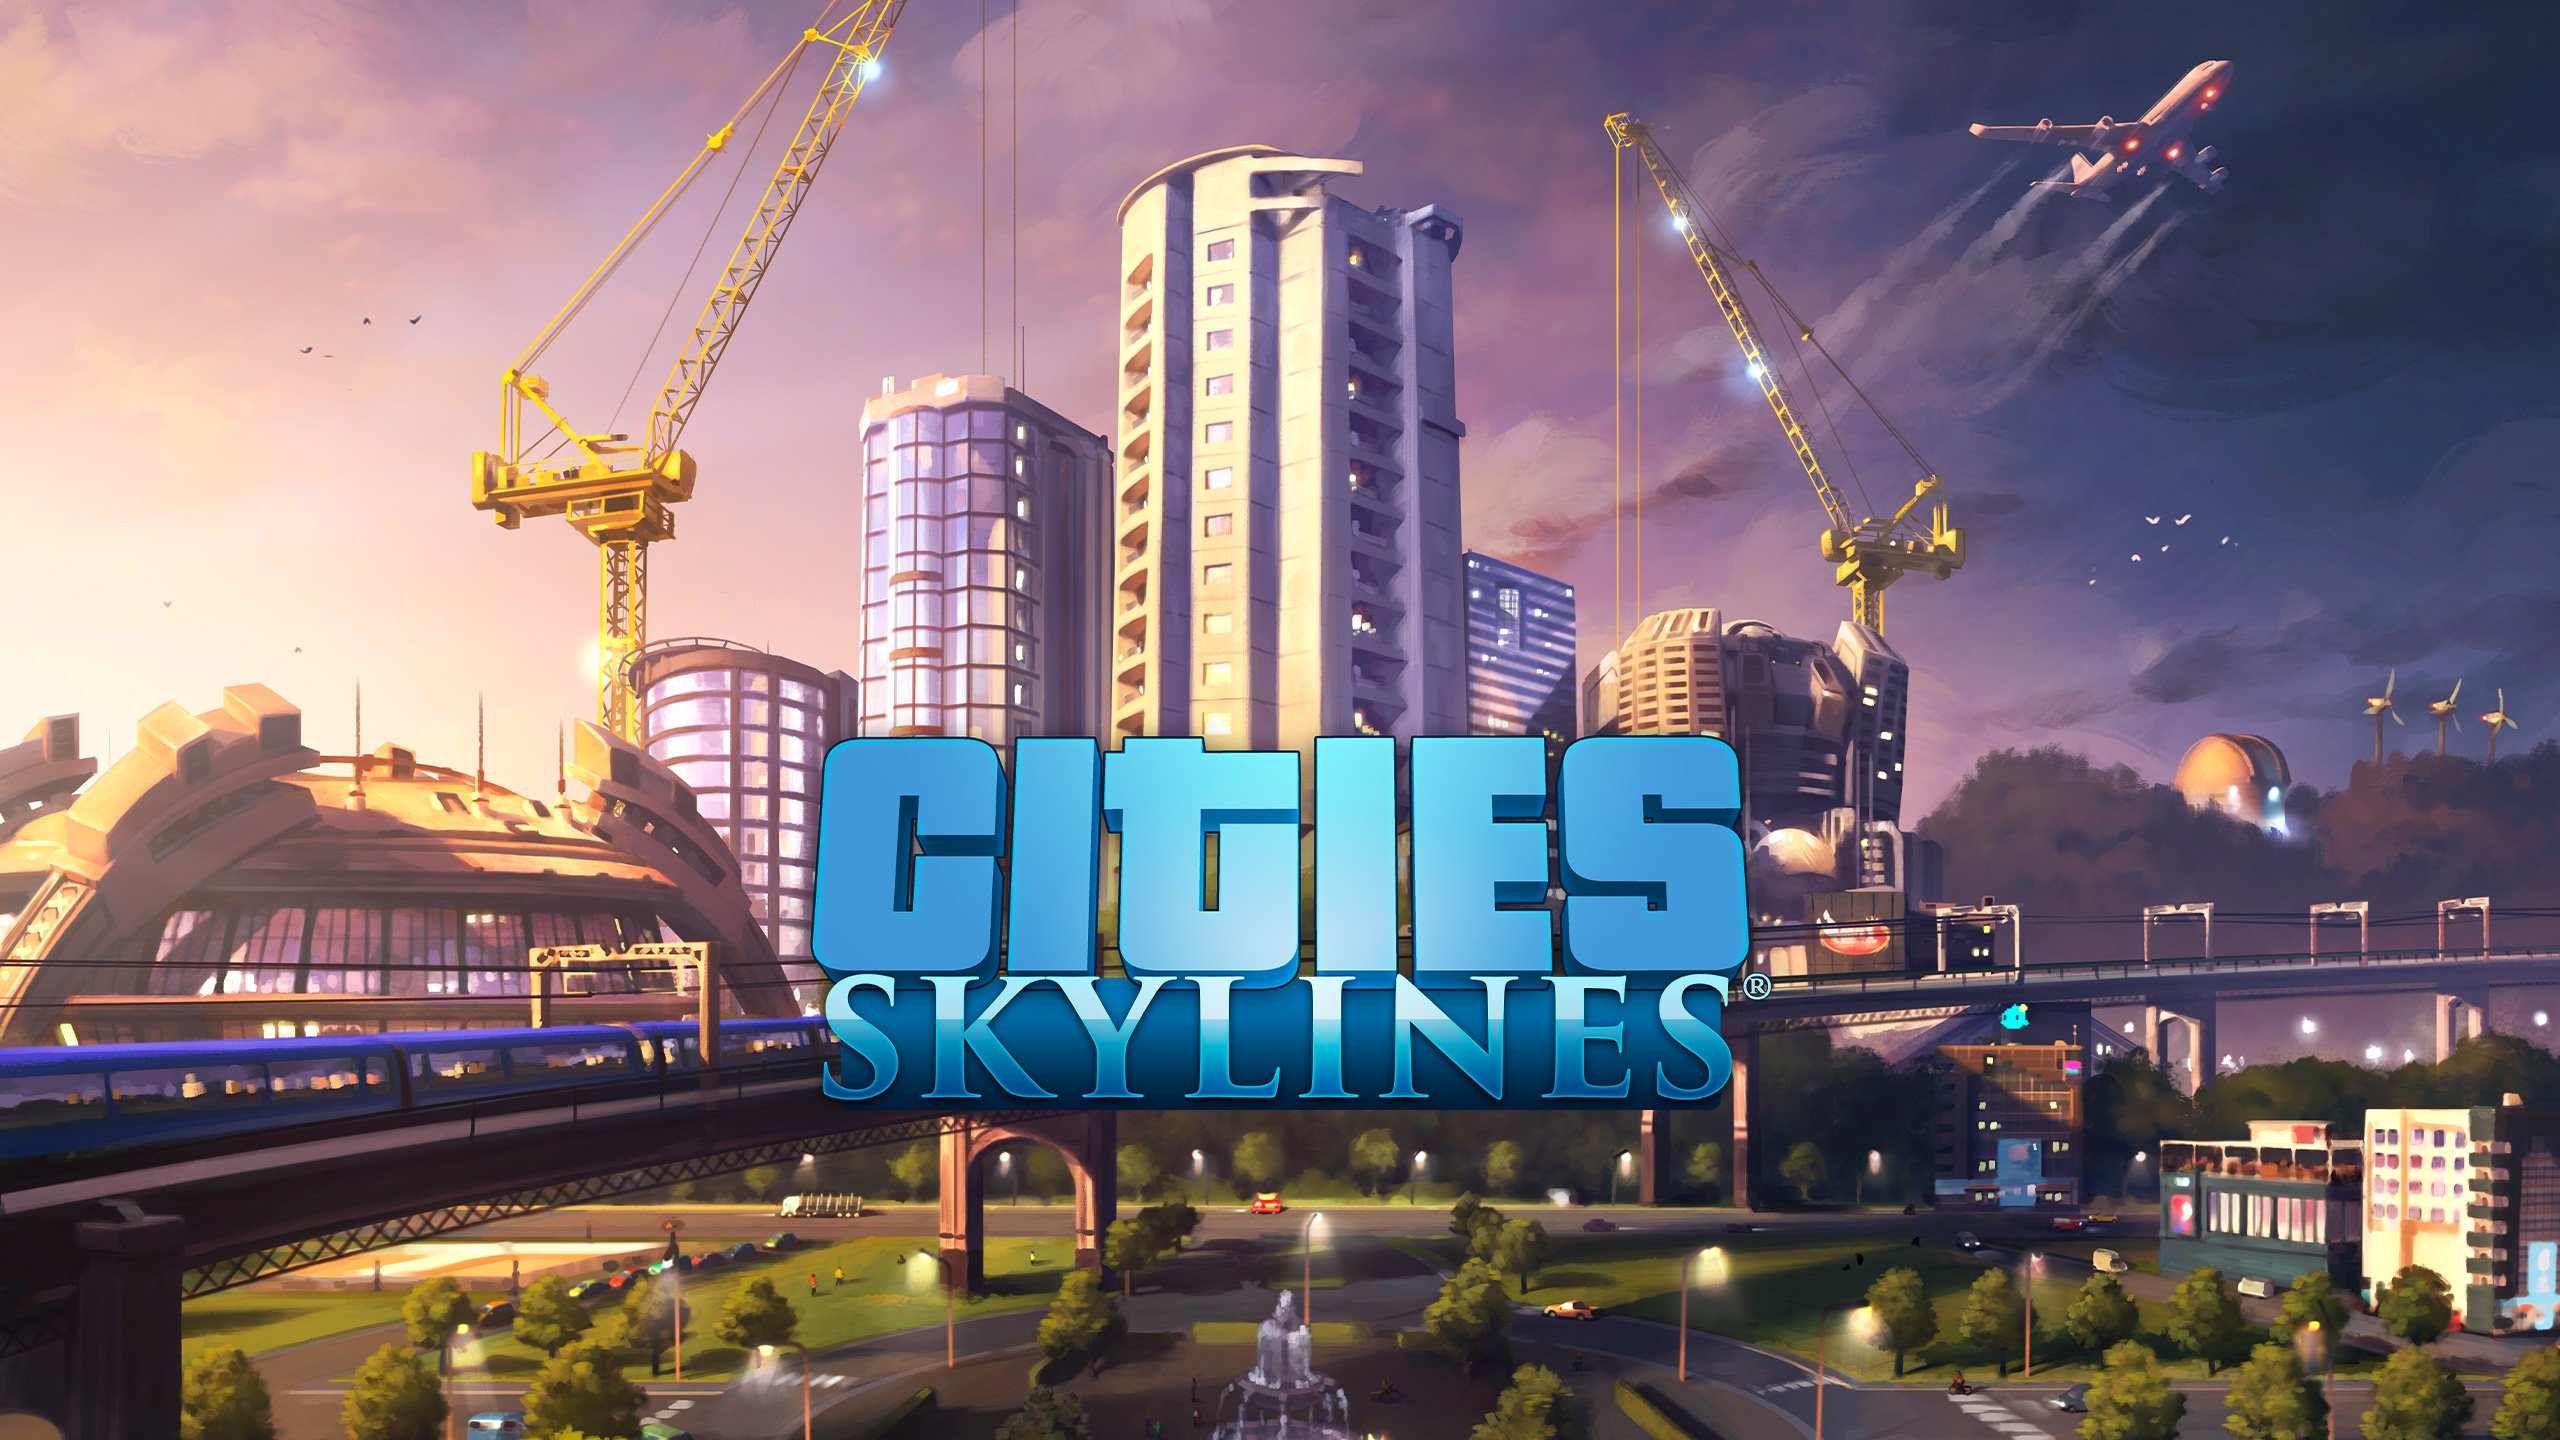 Cities Skylines 2 Gameplay Improvements: What Should the Devs Do